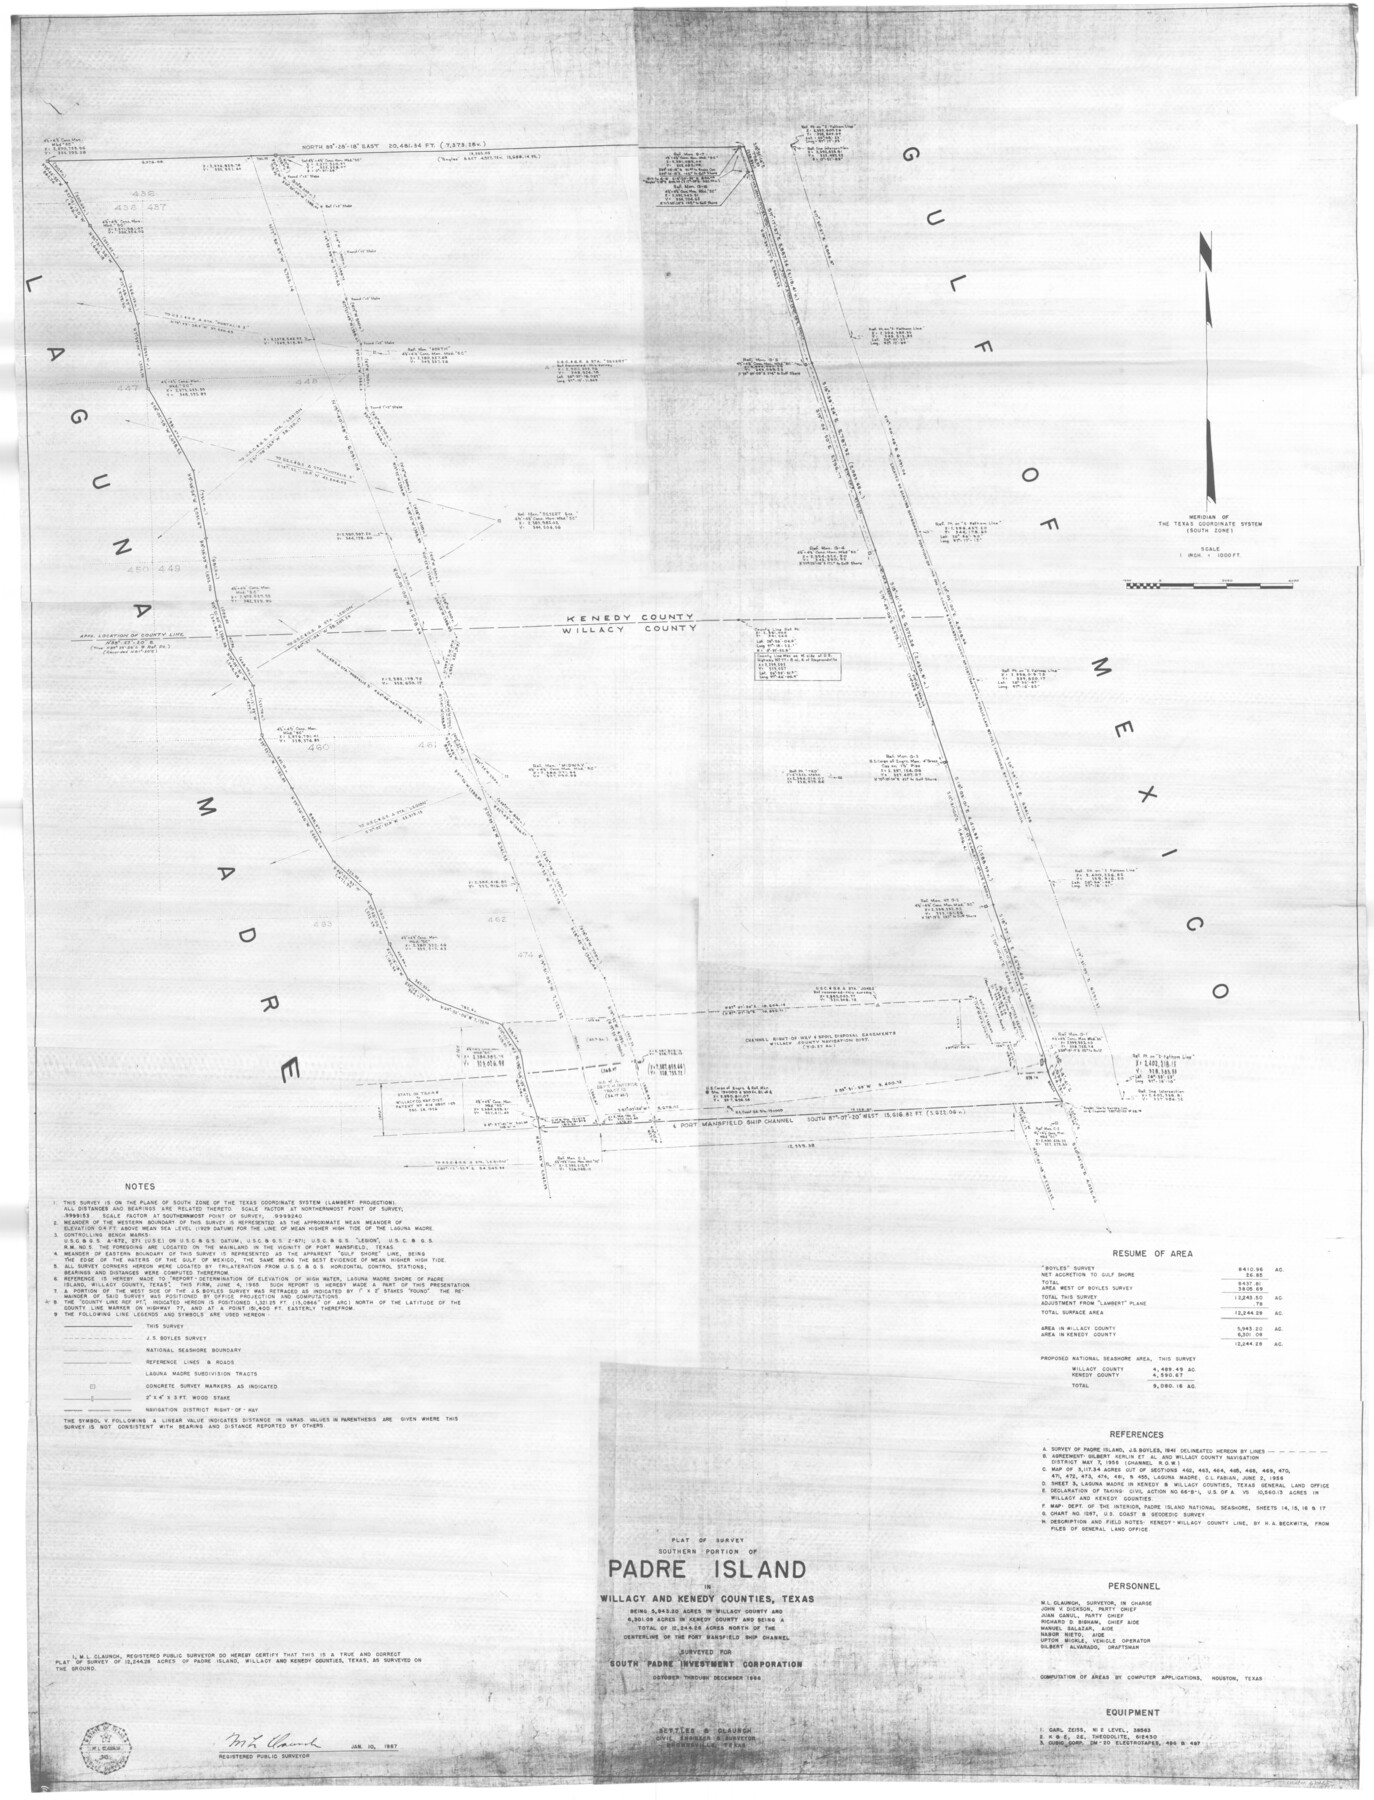 61425, Plat of a survey on Padre Island in Willacy and Kenedy Counties surveyed for South Padre Development Corporation by Settles and Claunch, General Map Collection